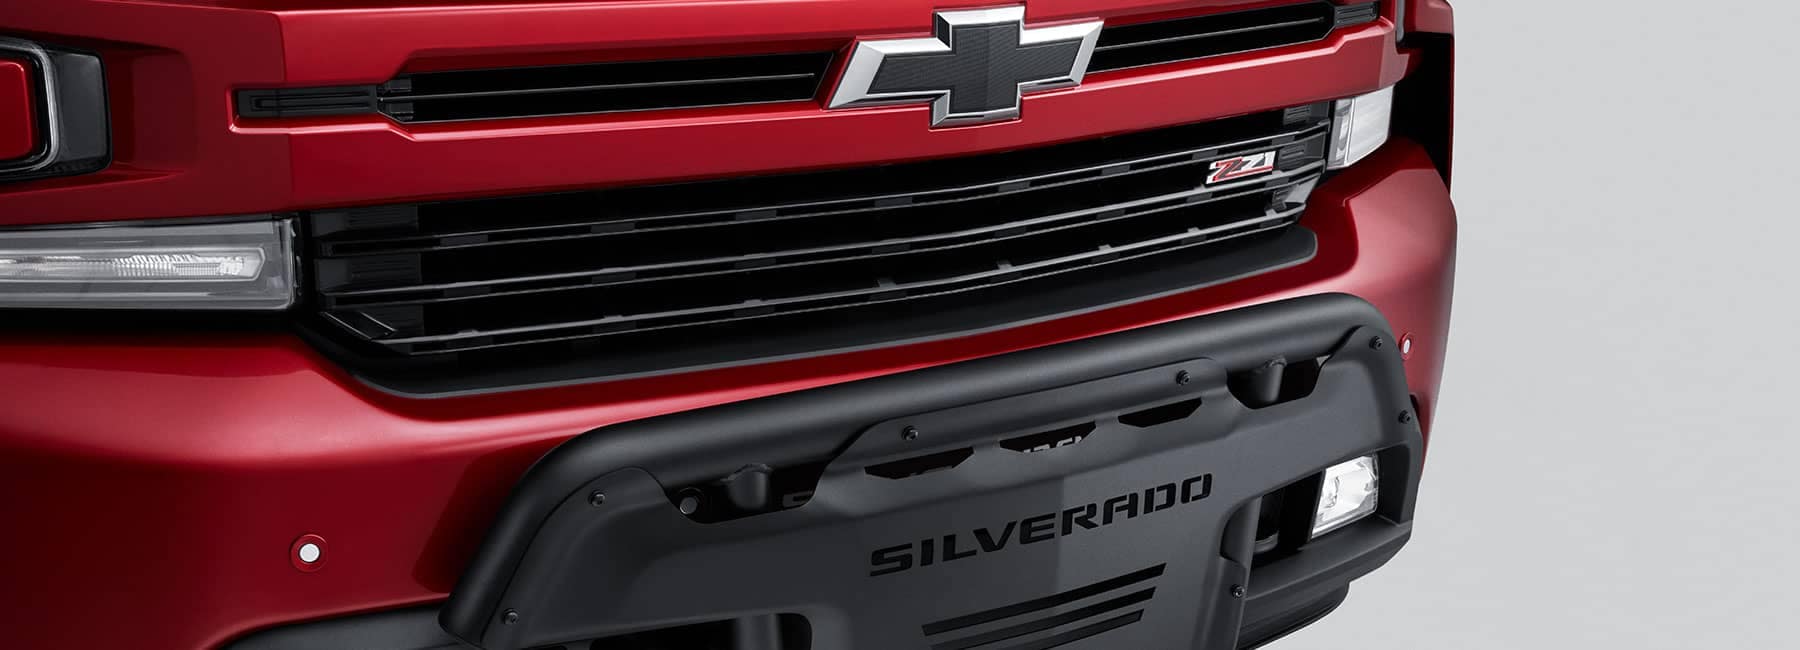 2019-Chevrolet red vehicle front logo 